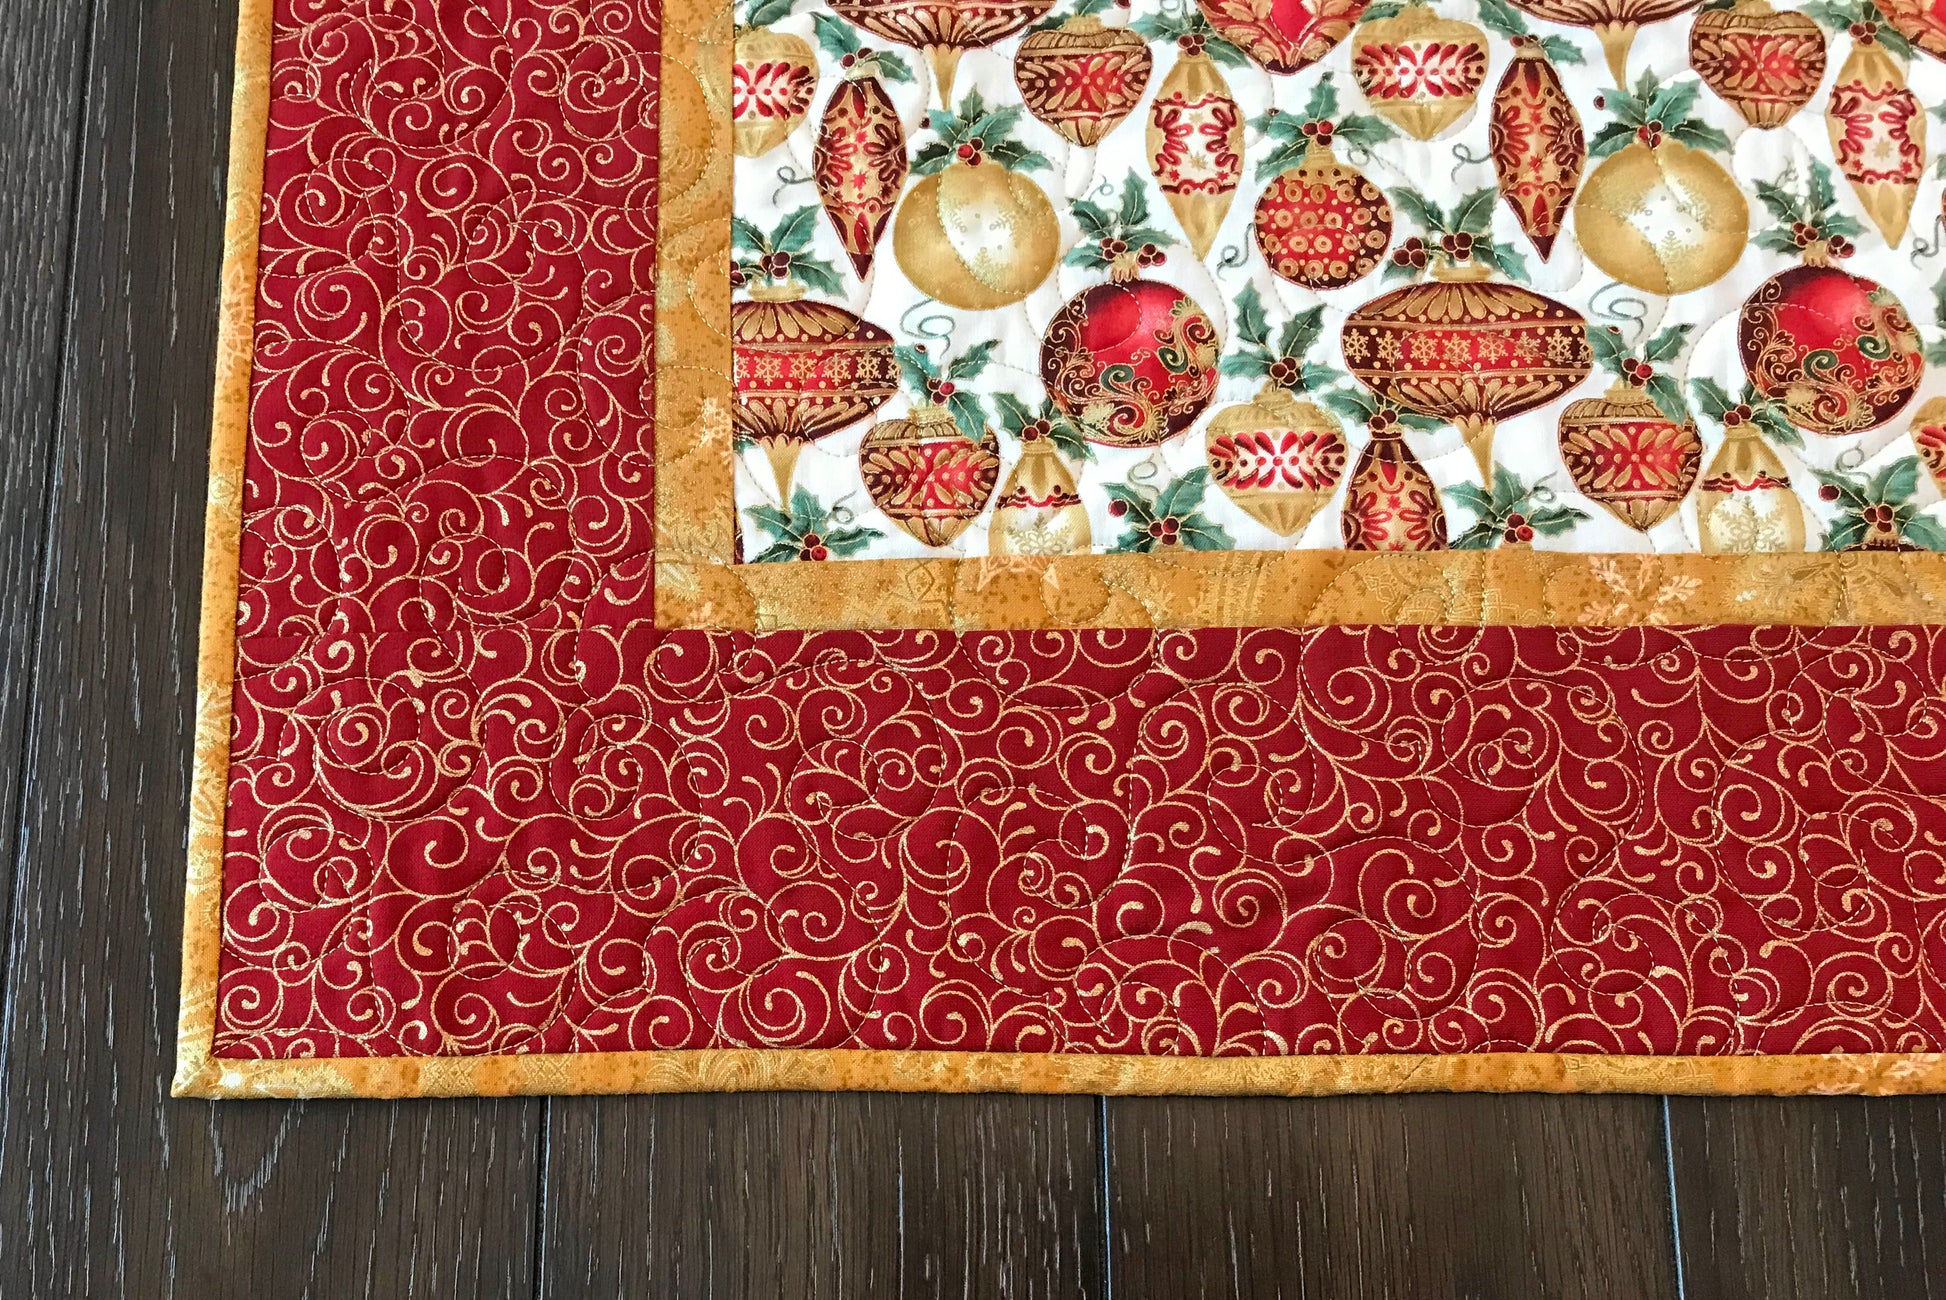 Red & Gold Christmas Ornament Table Topper - Handmade Quilts, Digital Patterns, and Home Décor items online - Cuddle Cat Quiltworks